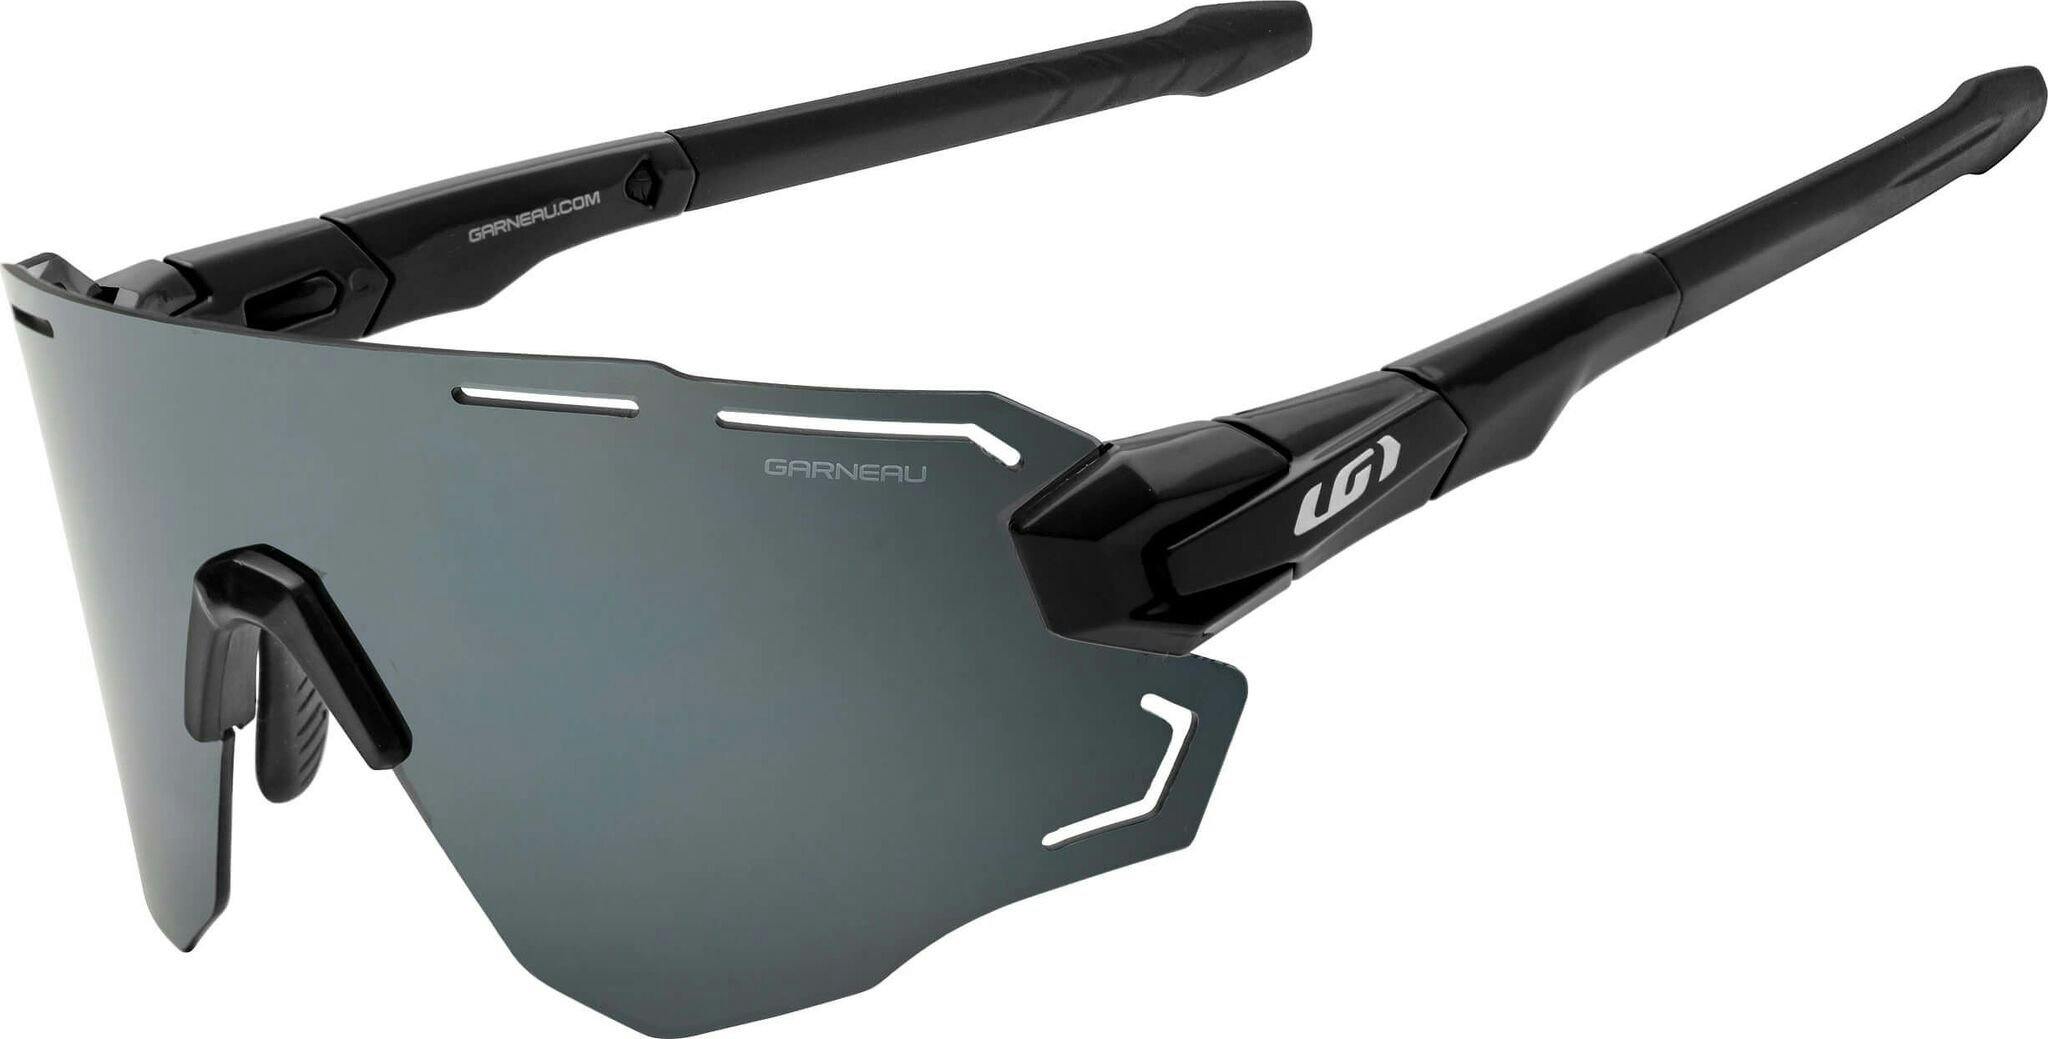 Product image for Lazer Shield Sunglasses with 3 Interchangeable Lenses